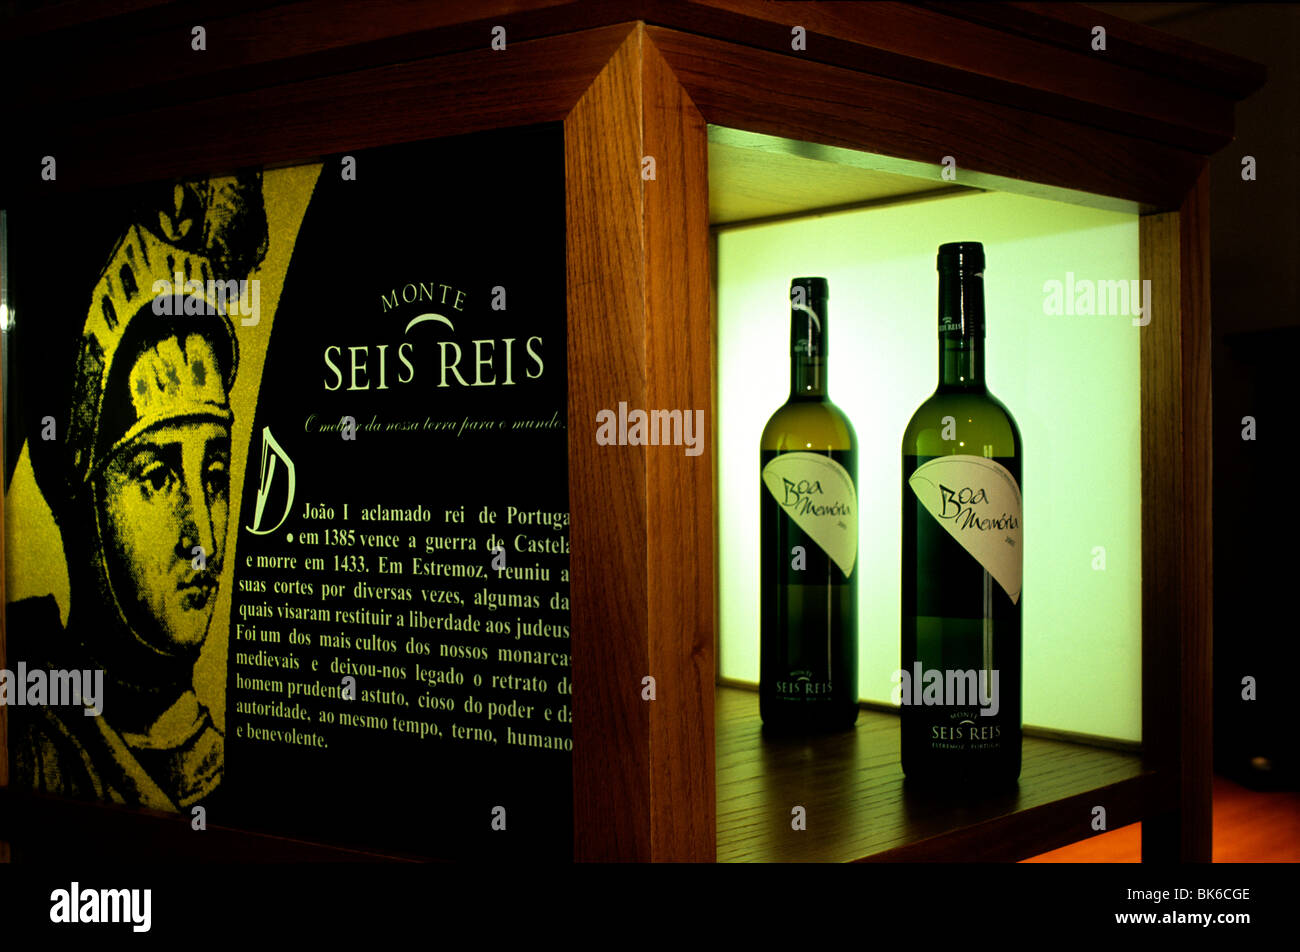 The interior of Monte Seis Reis winery near Estremoz, in southern Portugal's Alentejo province. Stock Photo